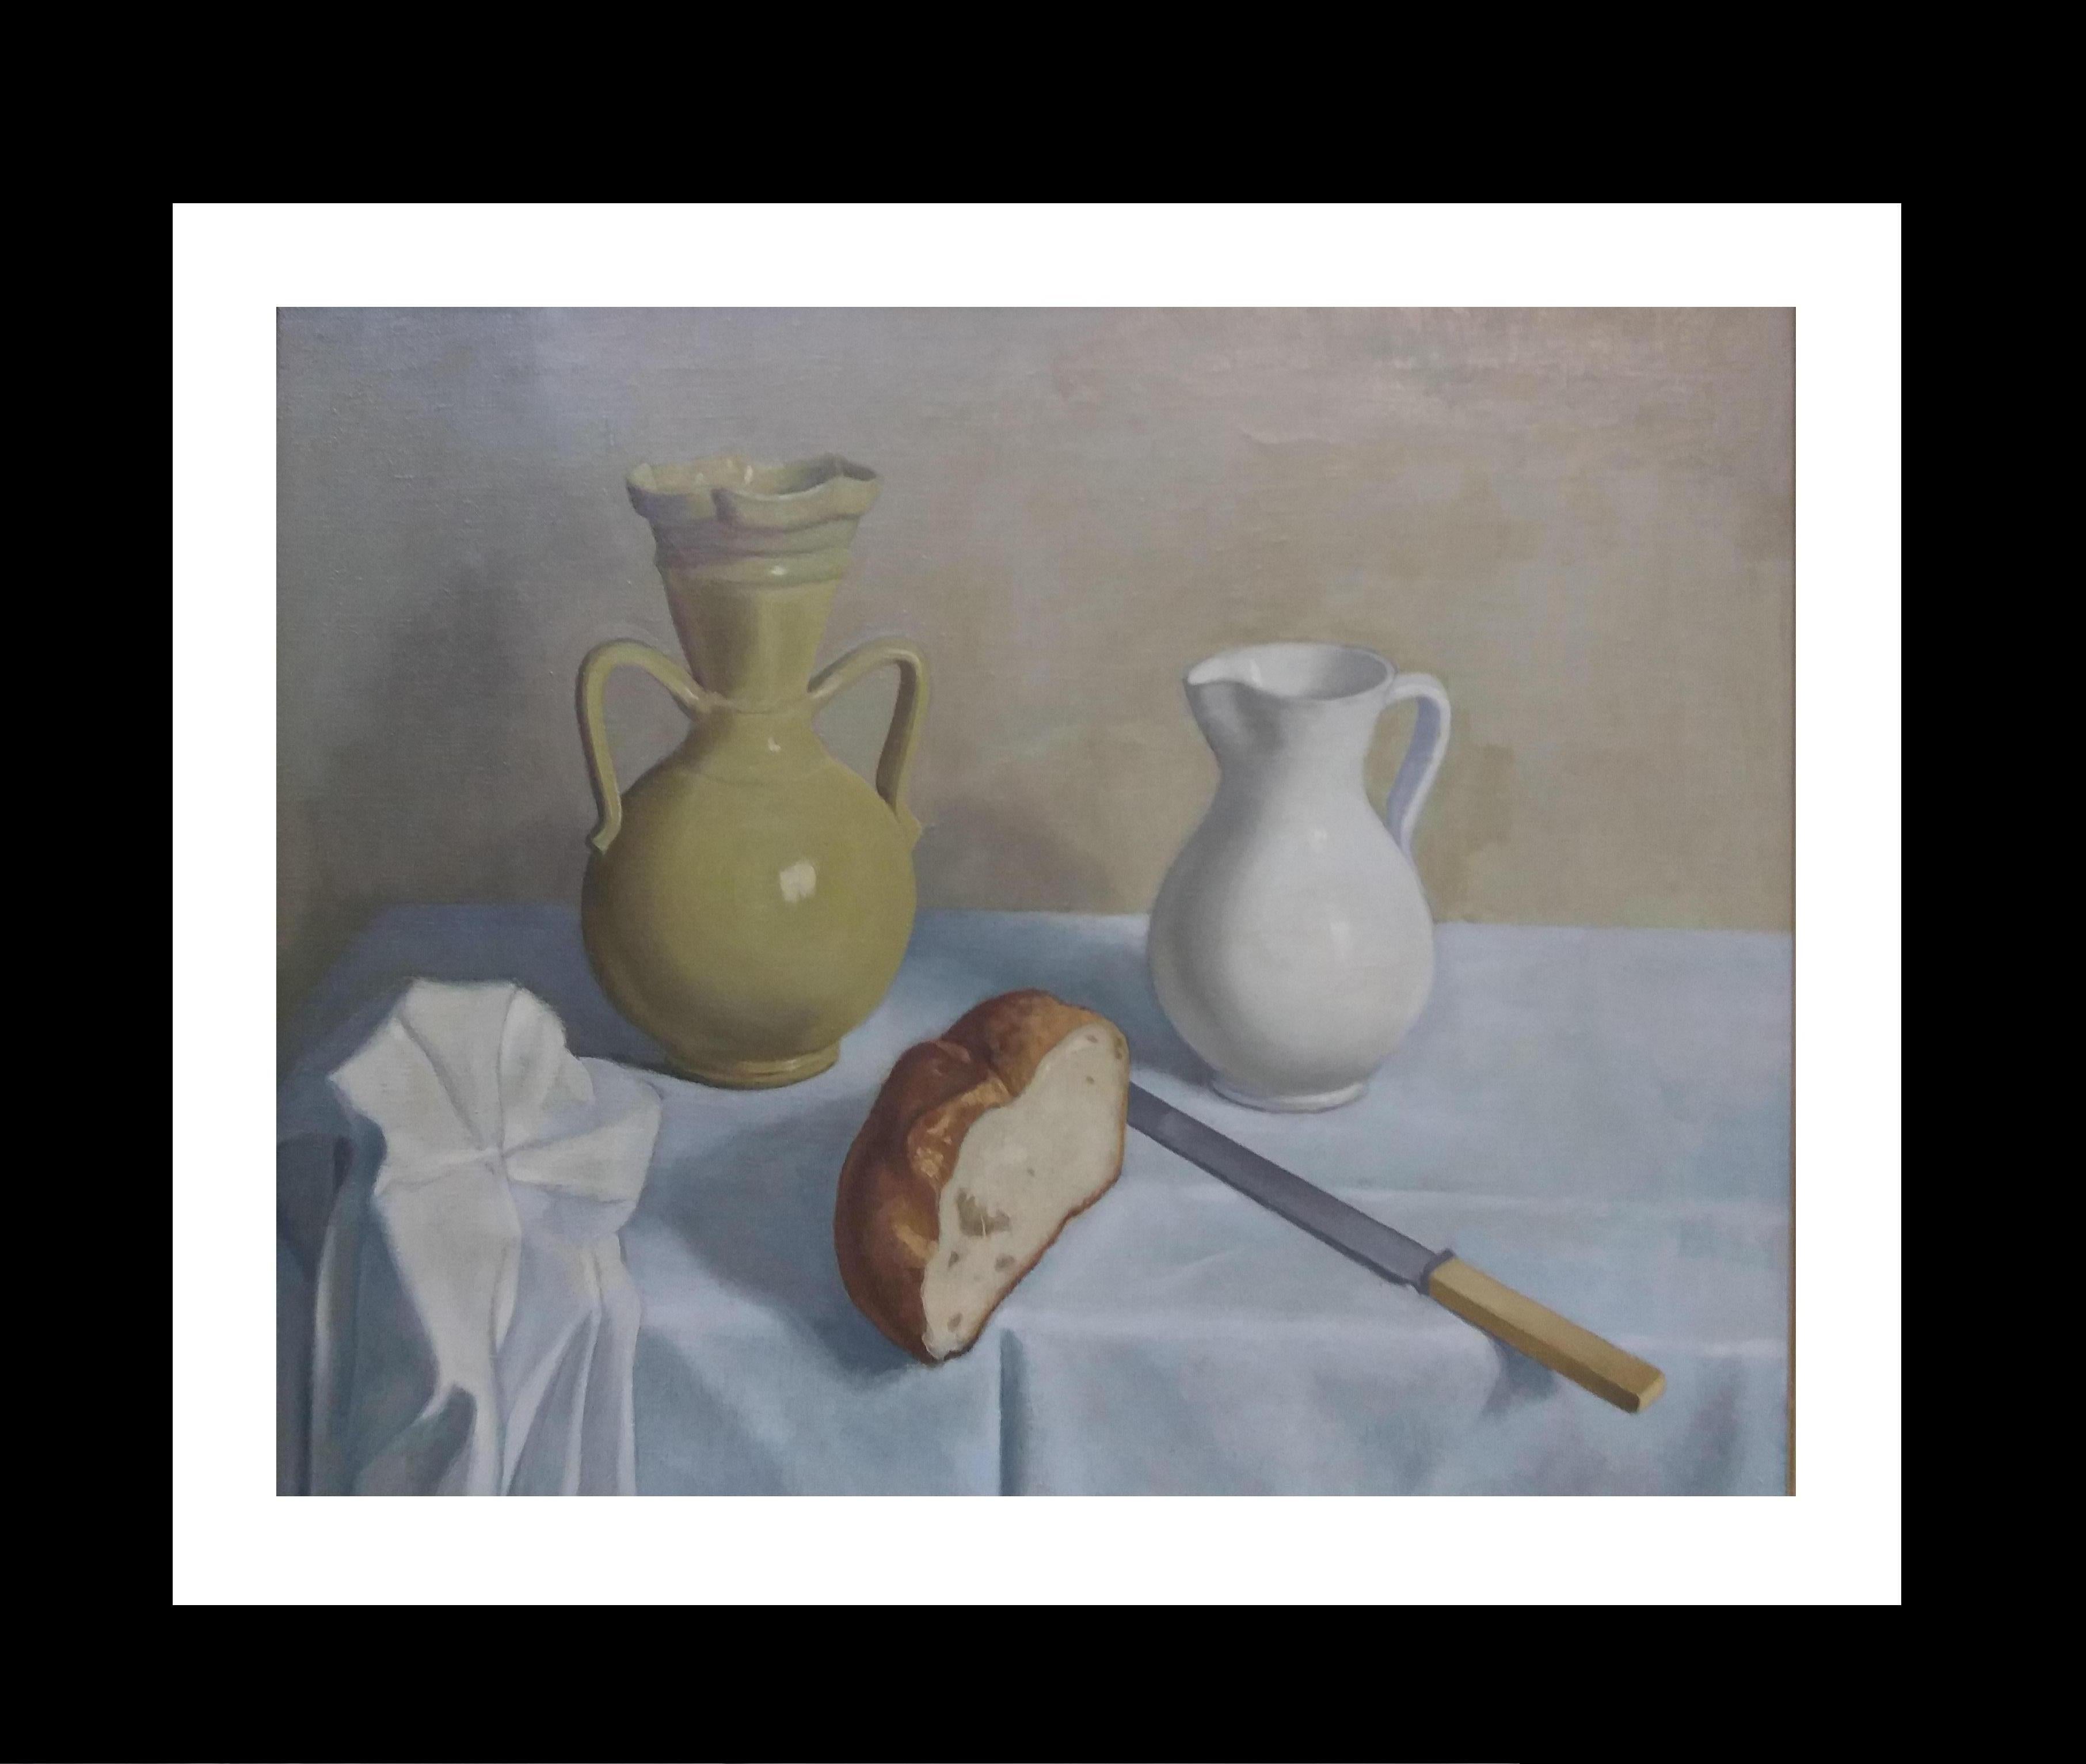 
. BREAD. JARS  original still life  acrylic painting. 
Illana, an artist trained in Barcelona and Paris, although heavily self-taught, reduces the forms in his paintings to essential elements, so he has been described as 'constructivist'. The